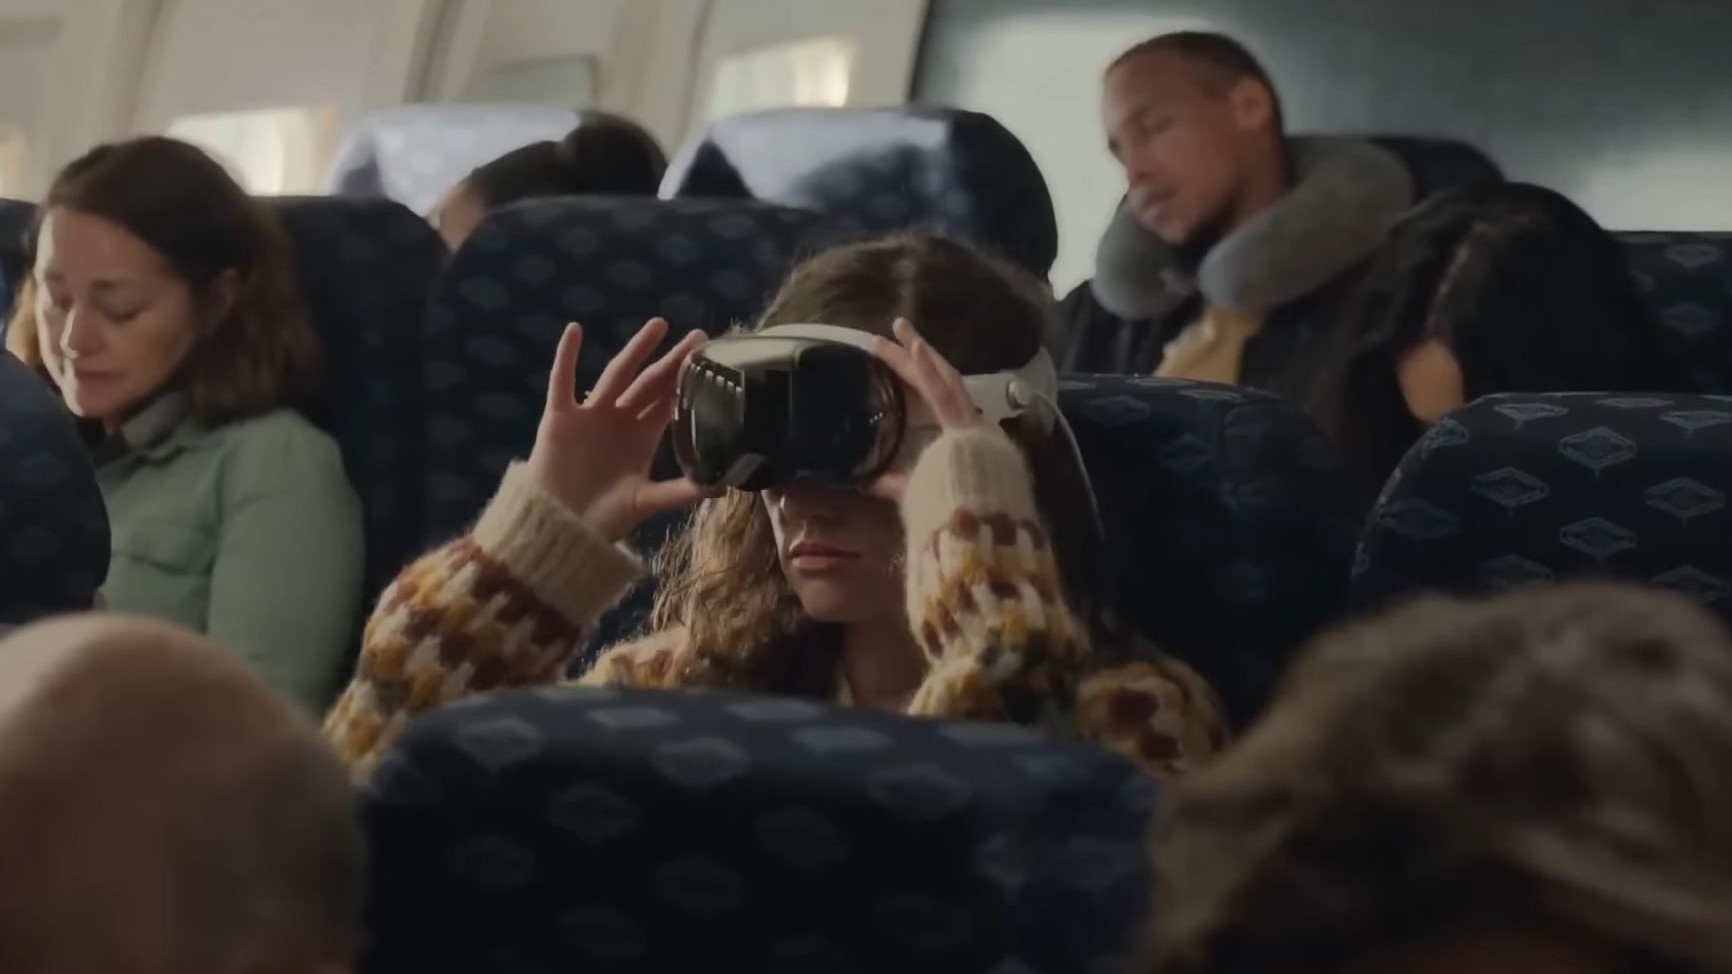 A woman wears Apple Vision Pro while next to other passengers on a plane.